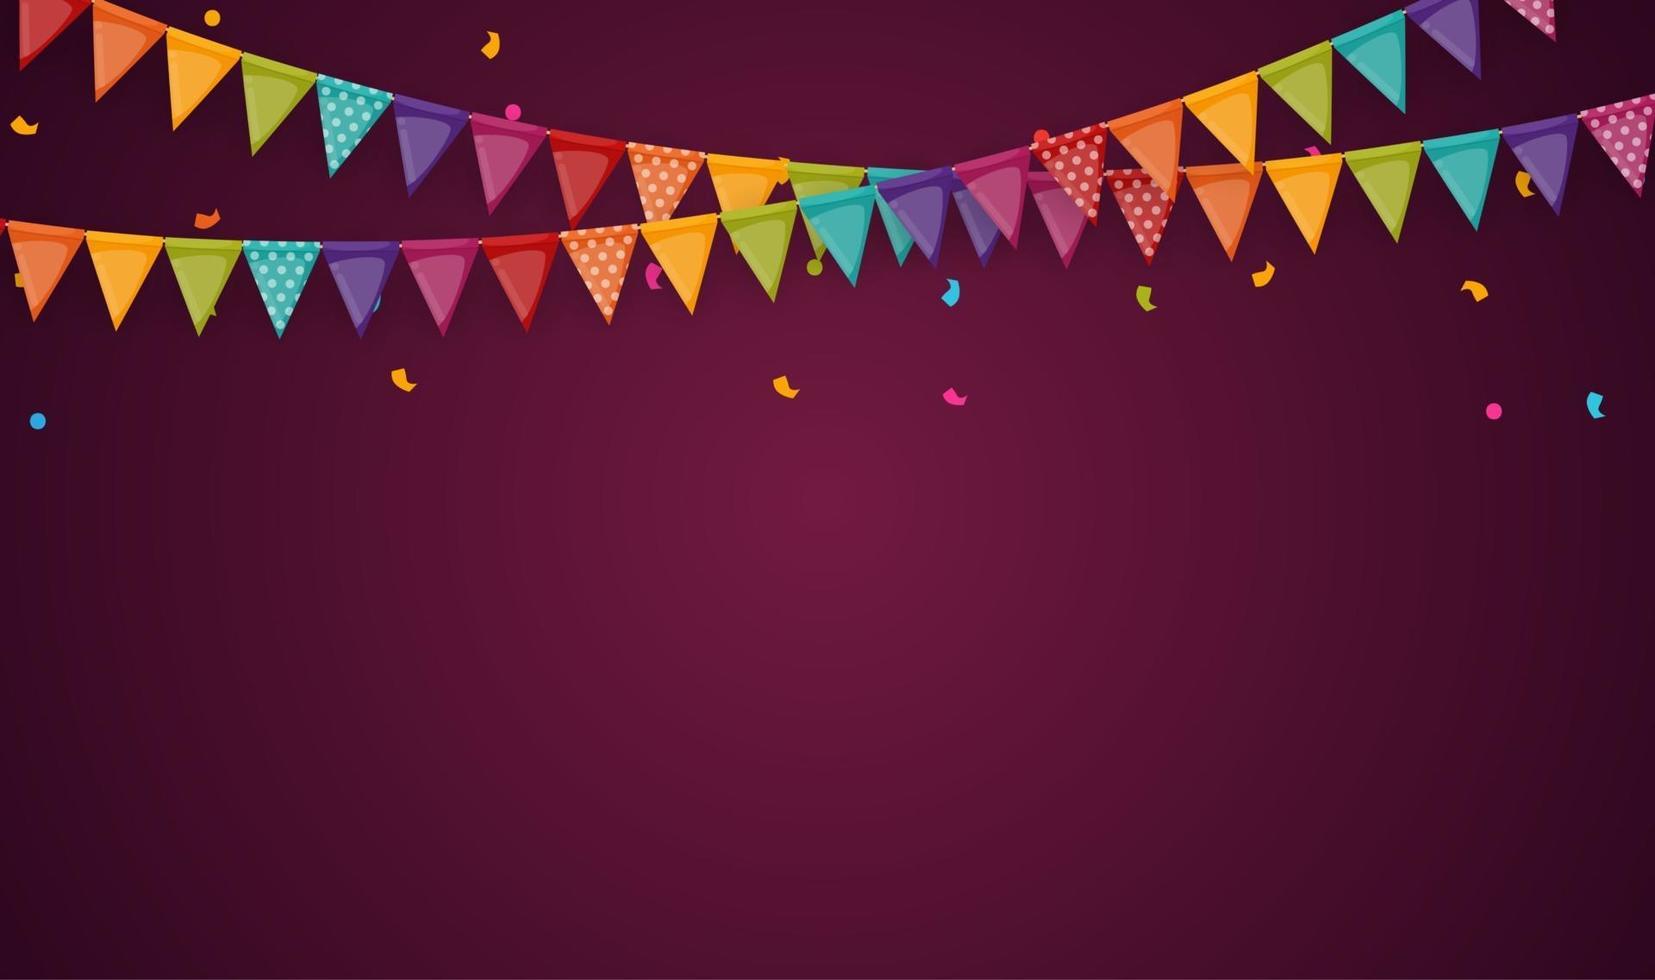 Banner with garland of flags and ribbons. Holiday Party background for birthday party, carnava. Vector Illustration